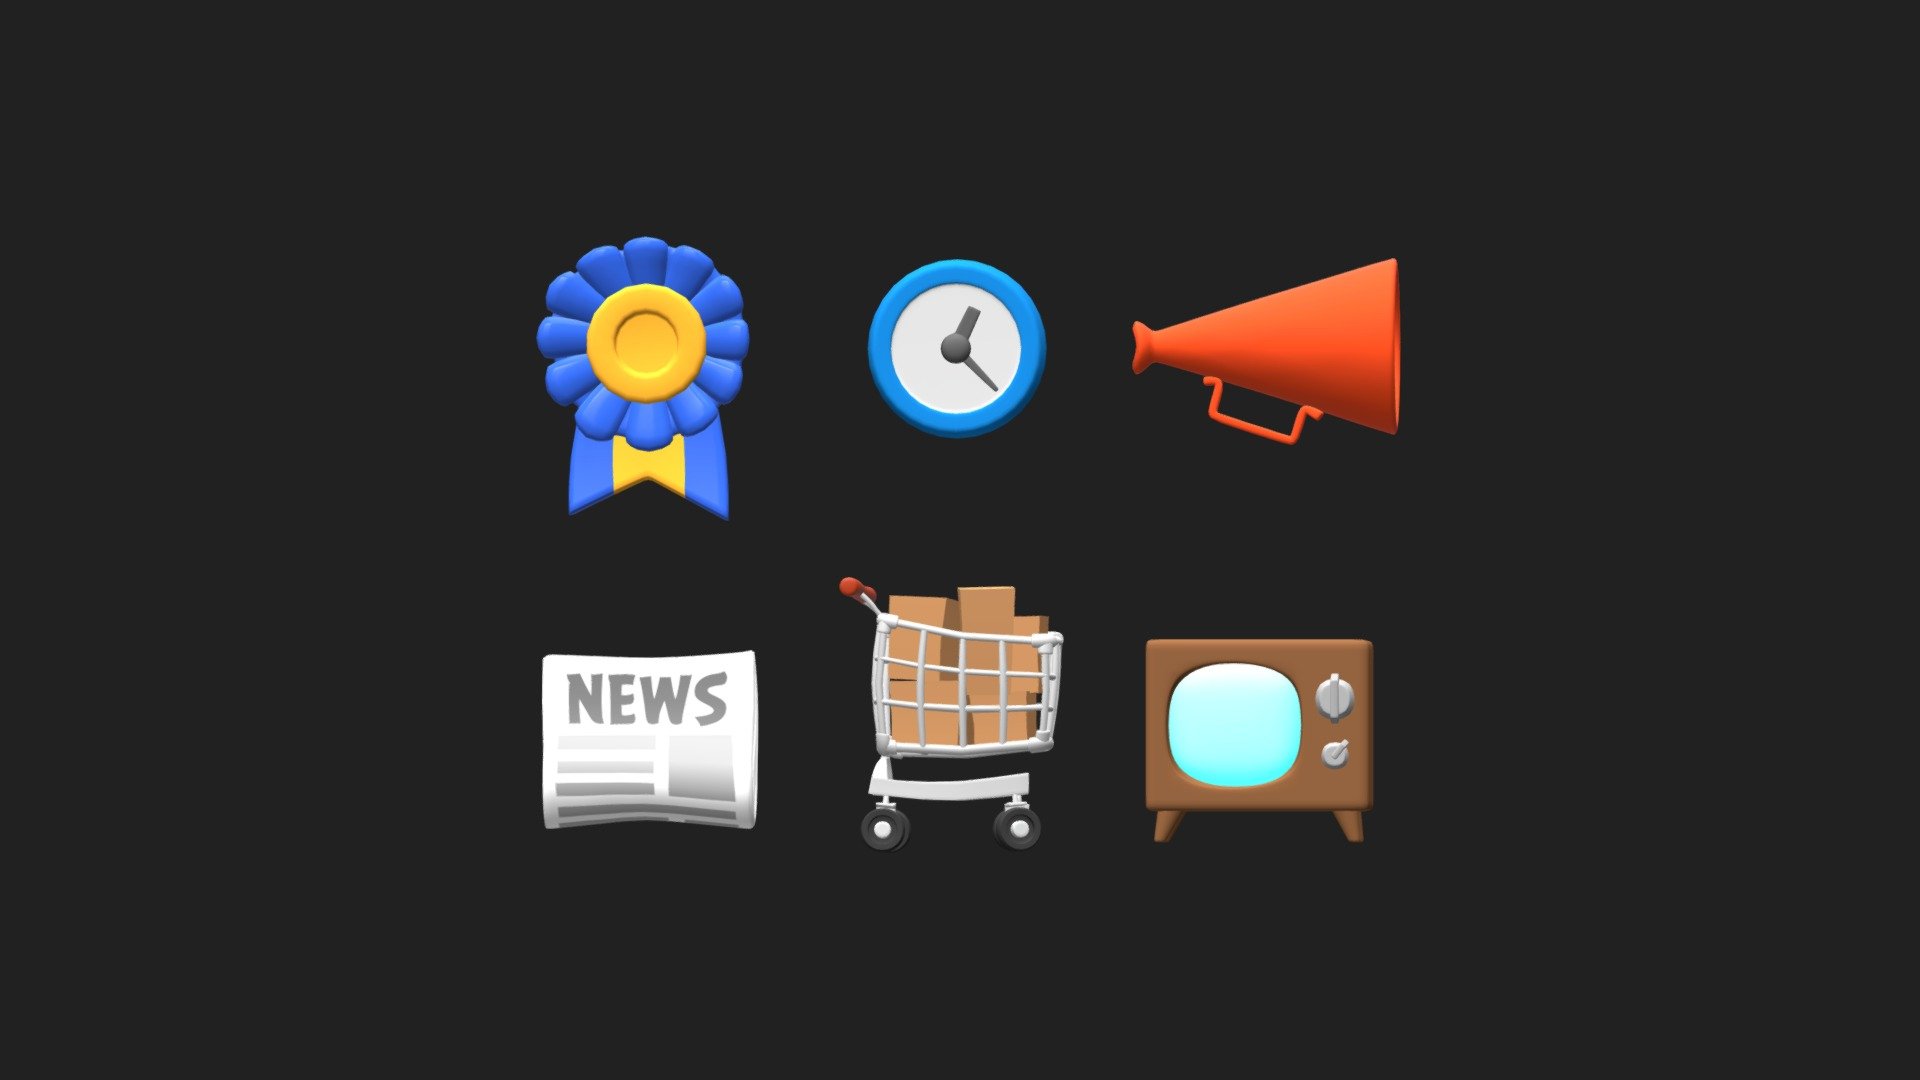 A set of 3D icons for an unrealized work project 3d model